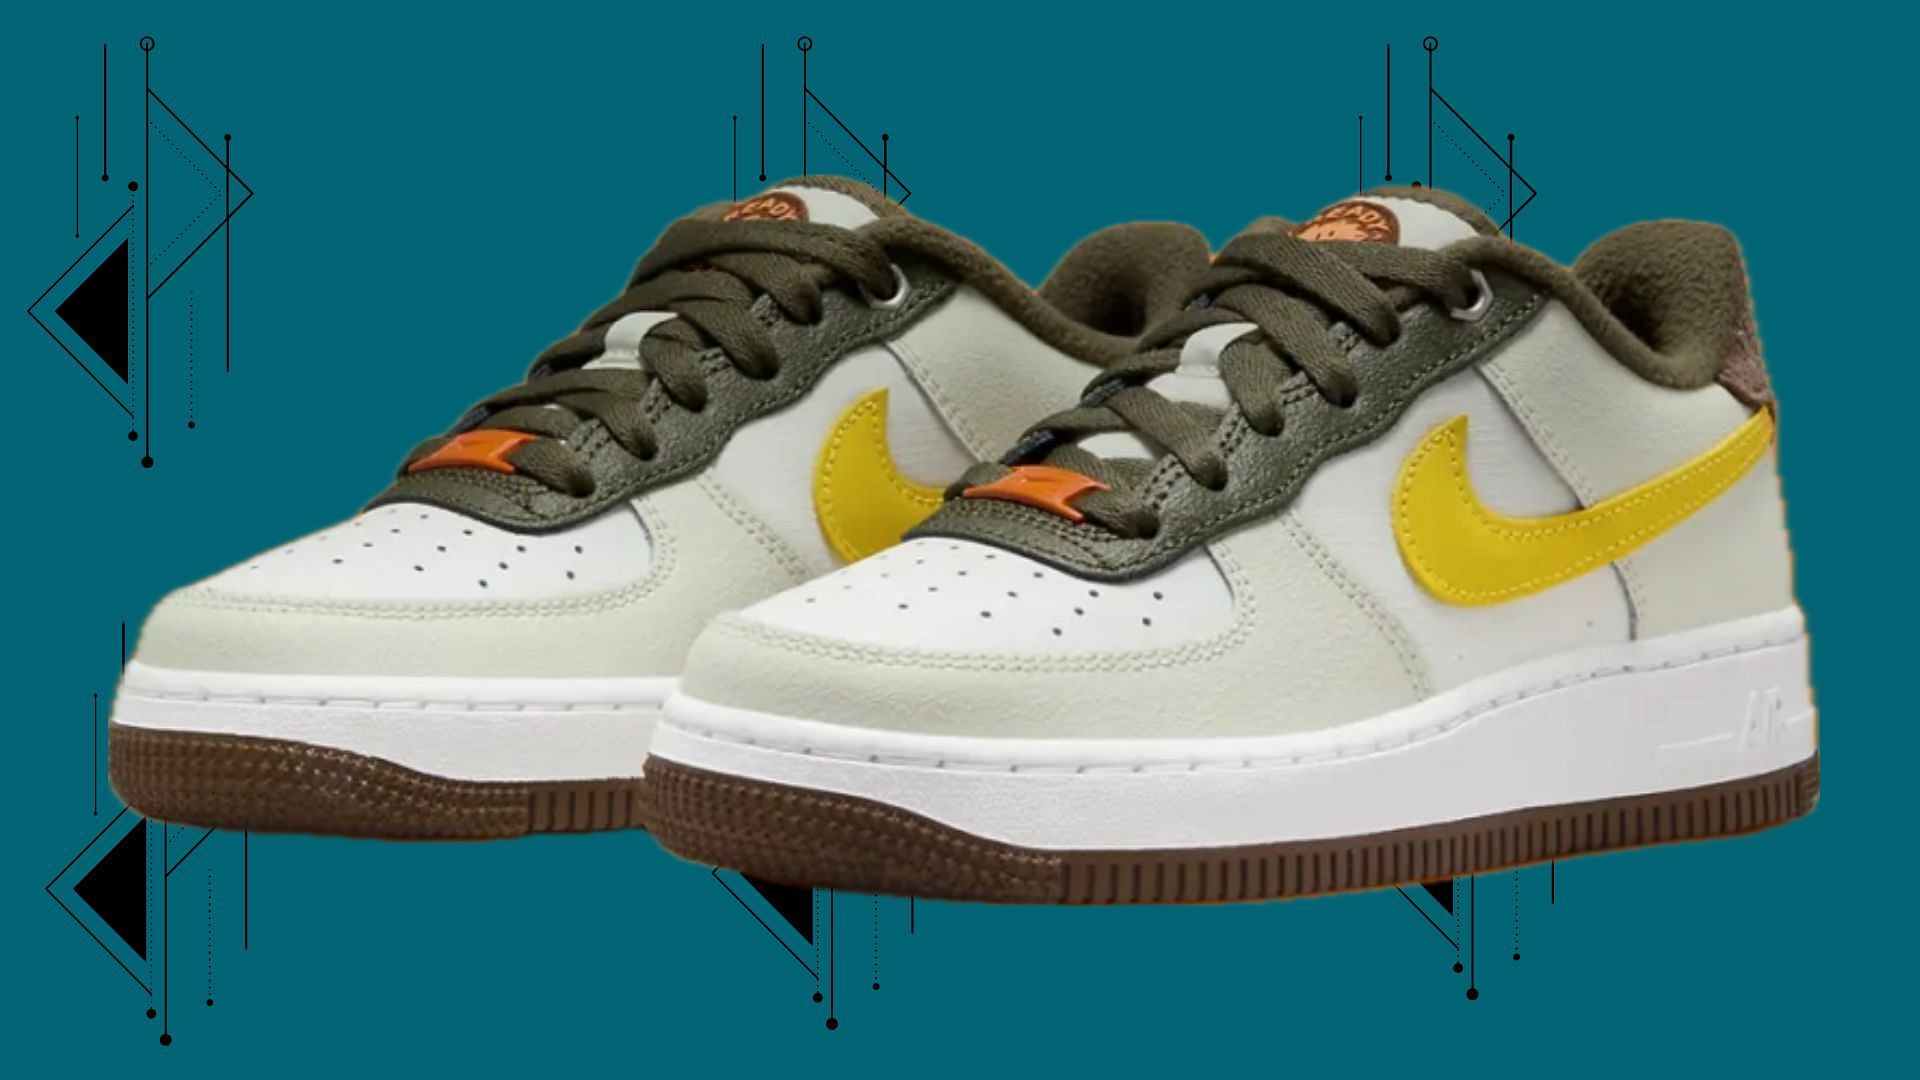 Nike Air Force 1 Low Ready, Play variant (Image via Nike)